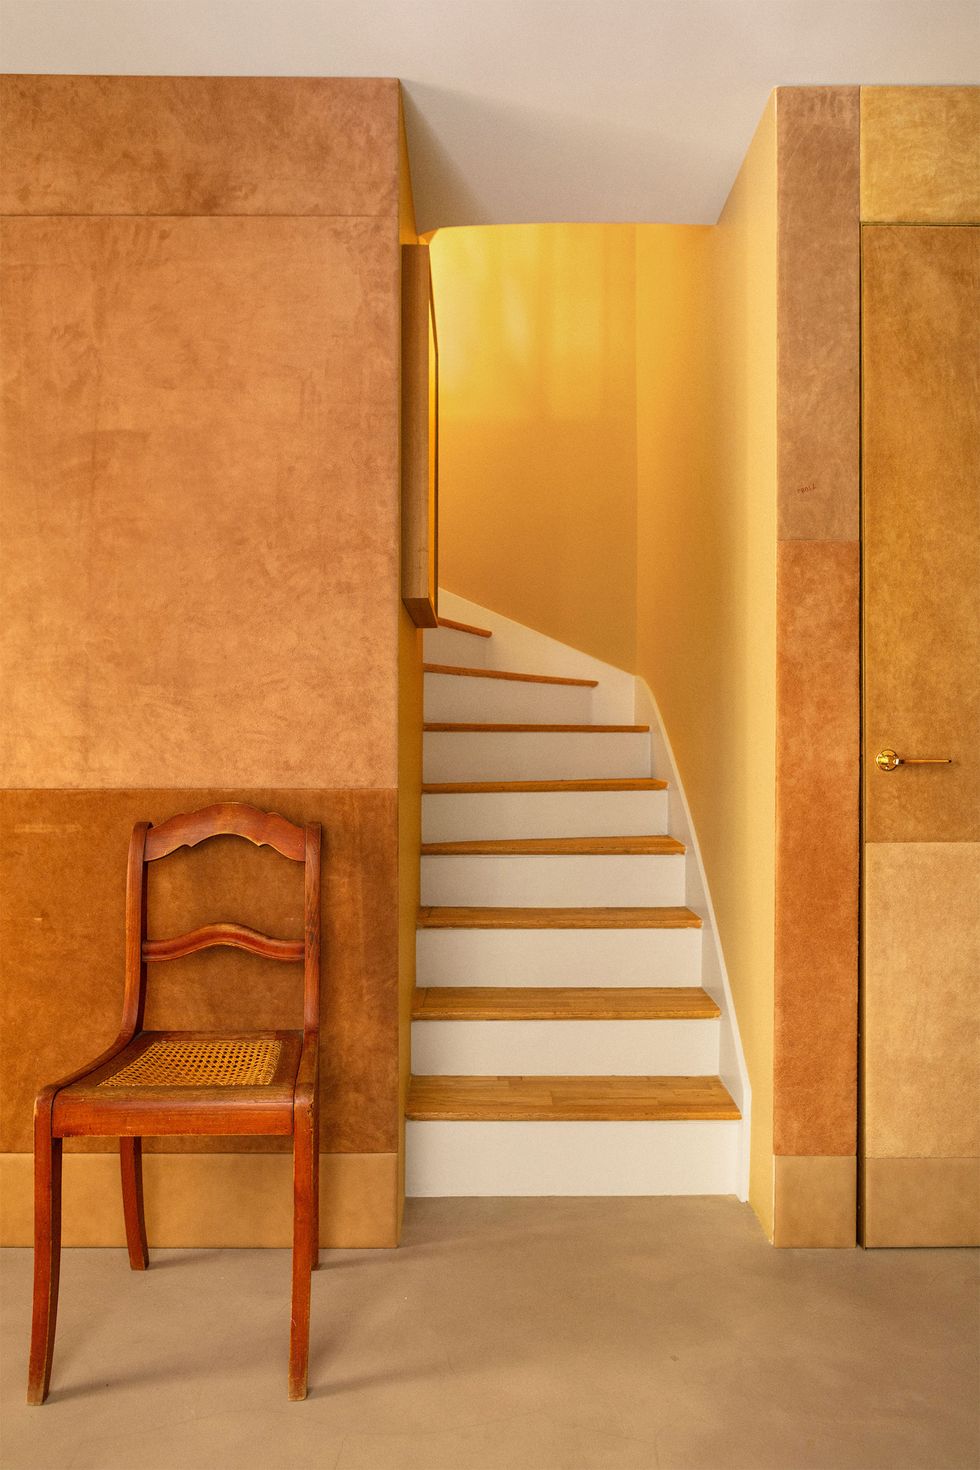 light colored space with honey colored walls and floor a small stairway leading up and a beautiful old cane seat chair standing guard